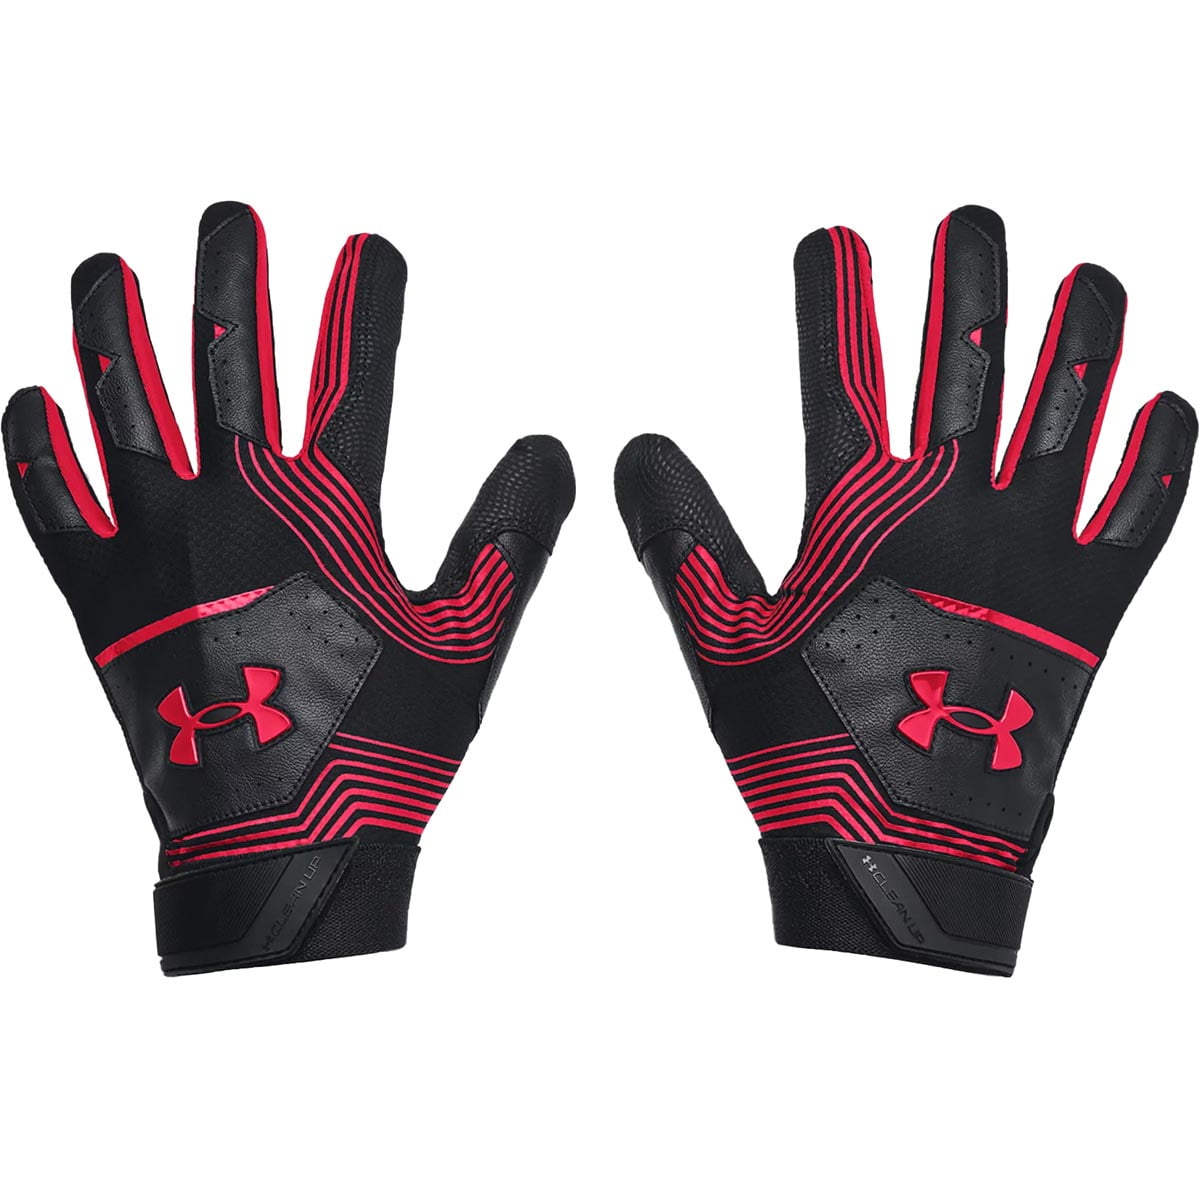 Easton Prowess VRS Glove Designed For The Female Athlete Women's Md 